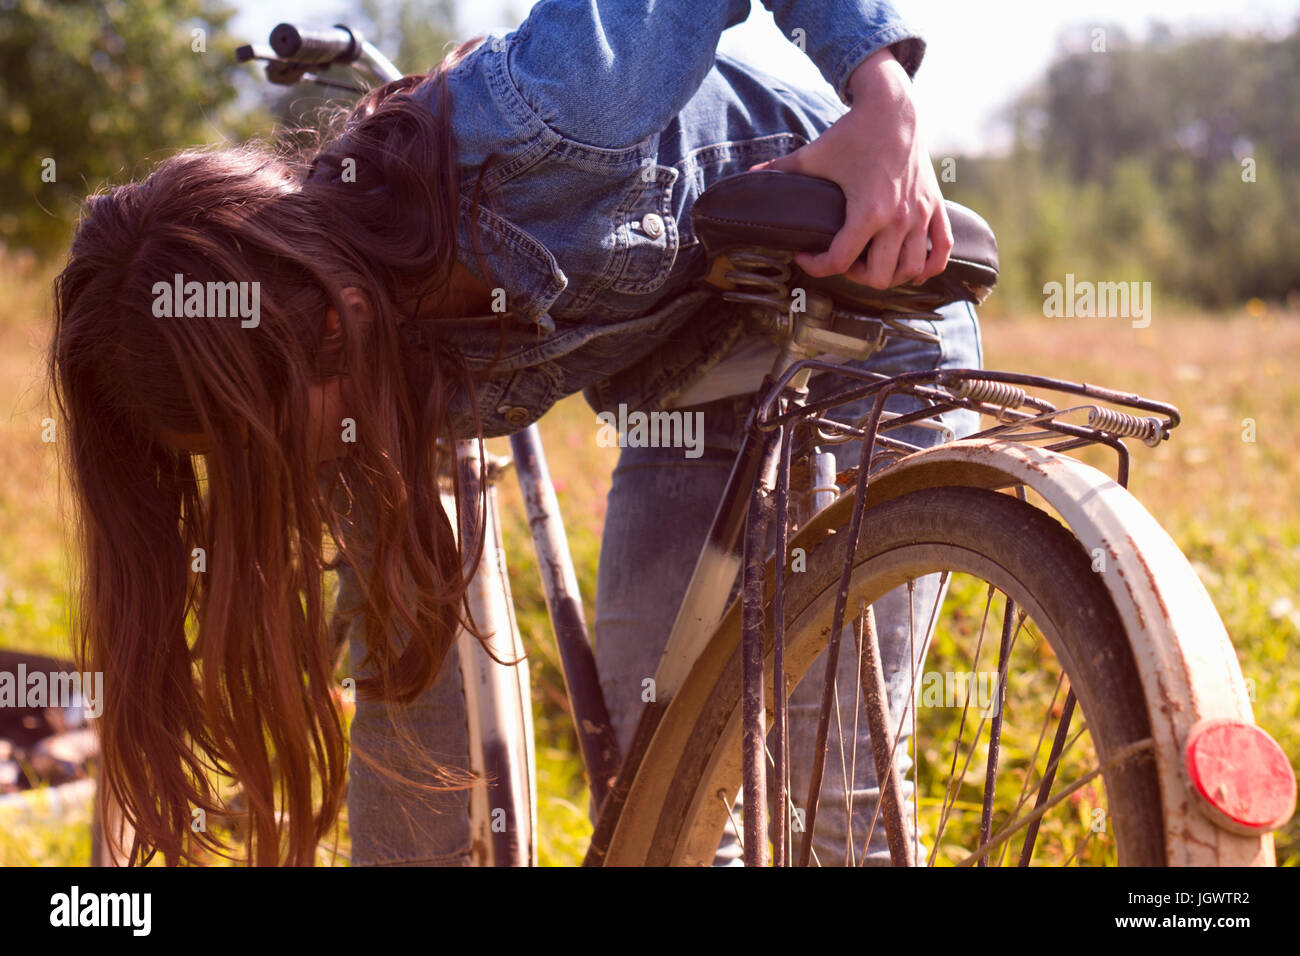 Teenage girl leaning over her bicycle in field Stock Photo